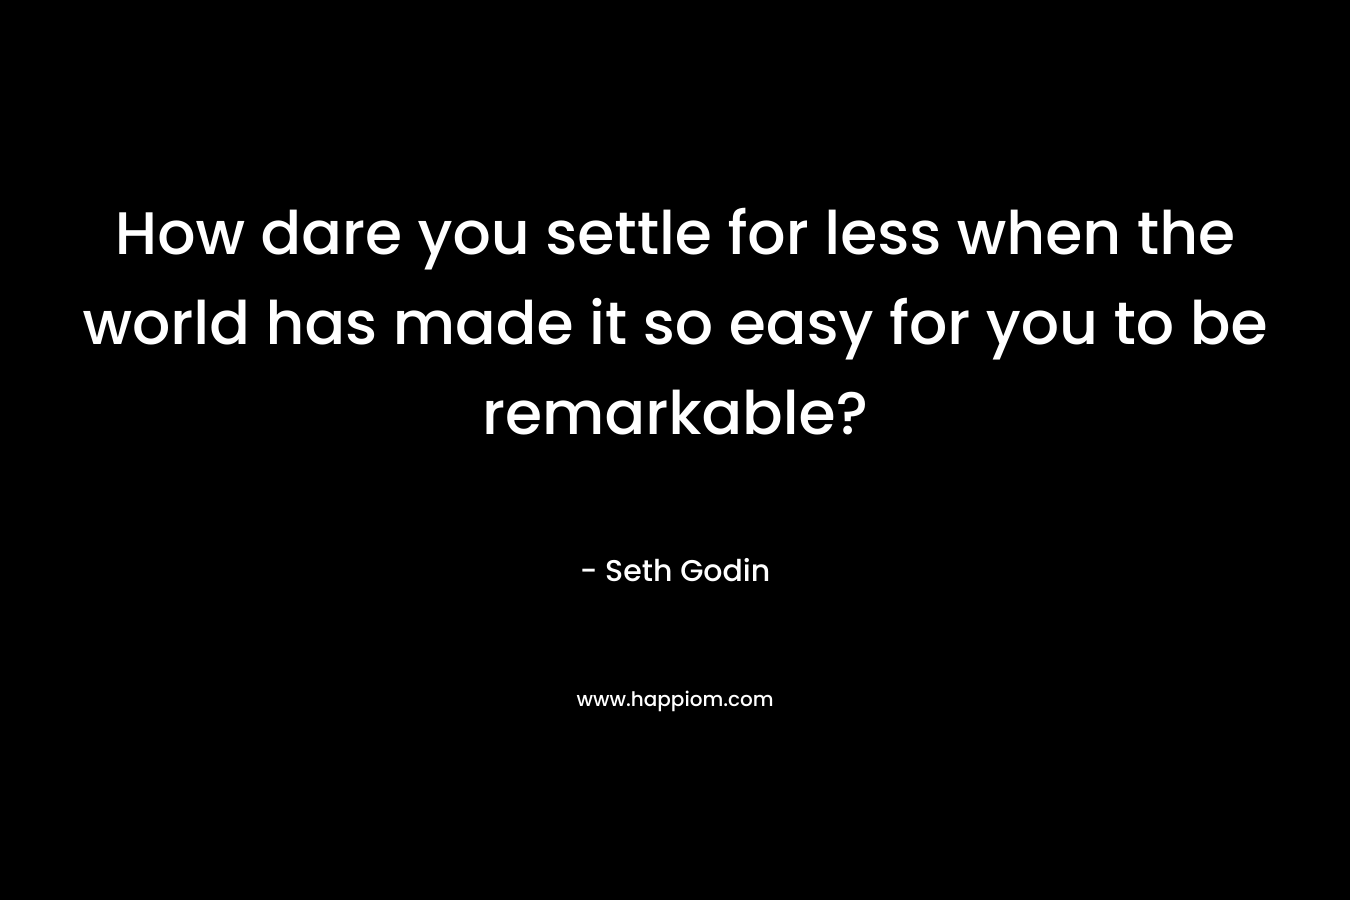 How dare you settle for less when the world has made it so easy for you to be remarkable? – Seth Godin